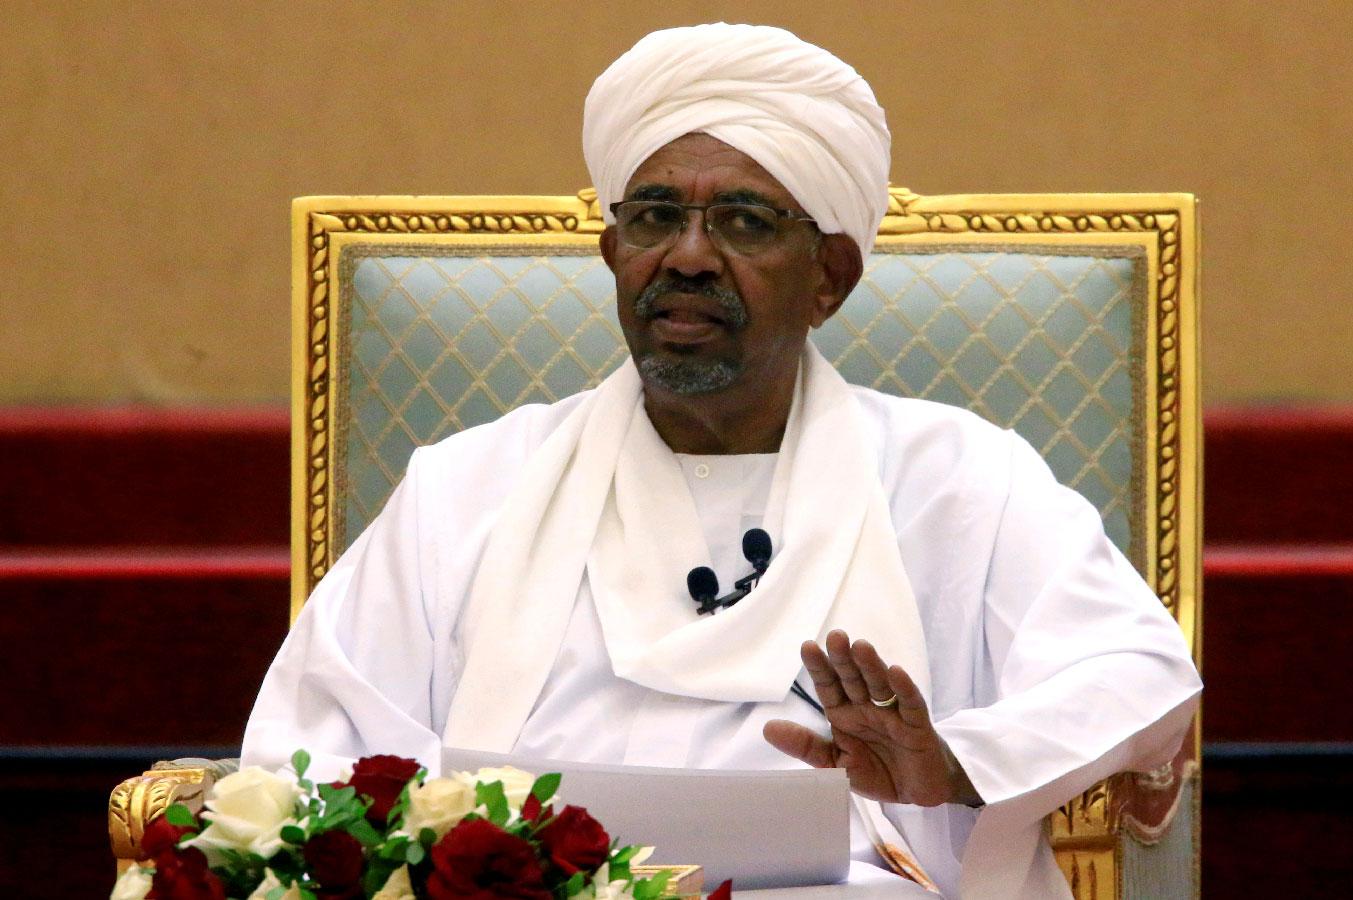 Bashir is being sought by the International Criminal Court over allegations of genocide